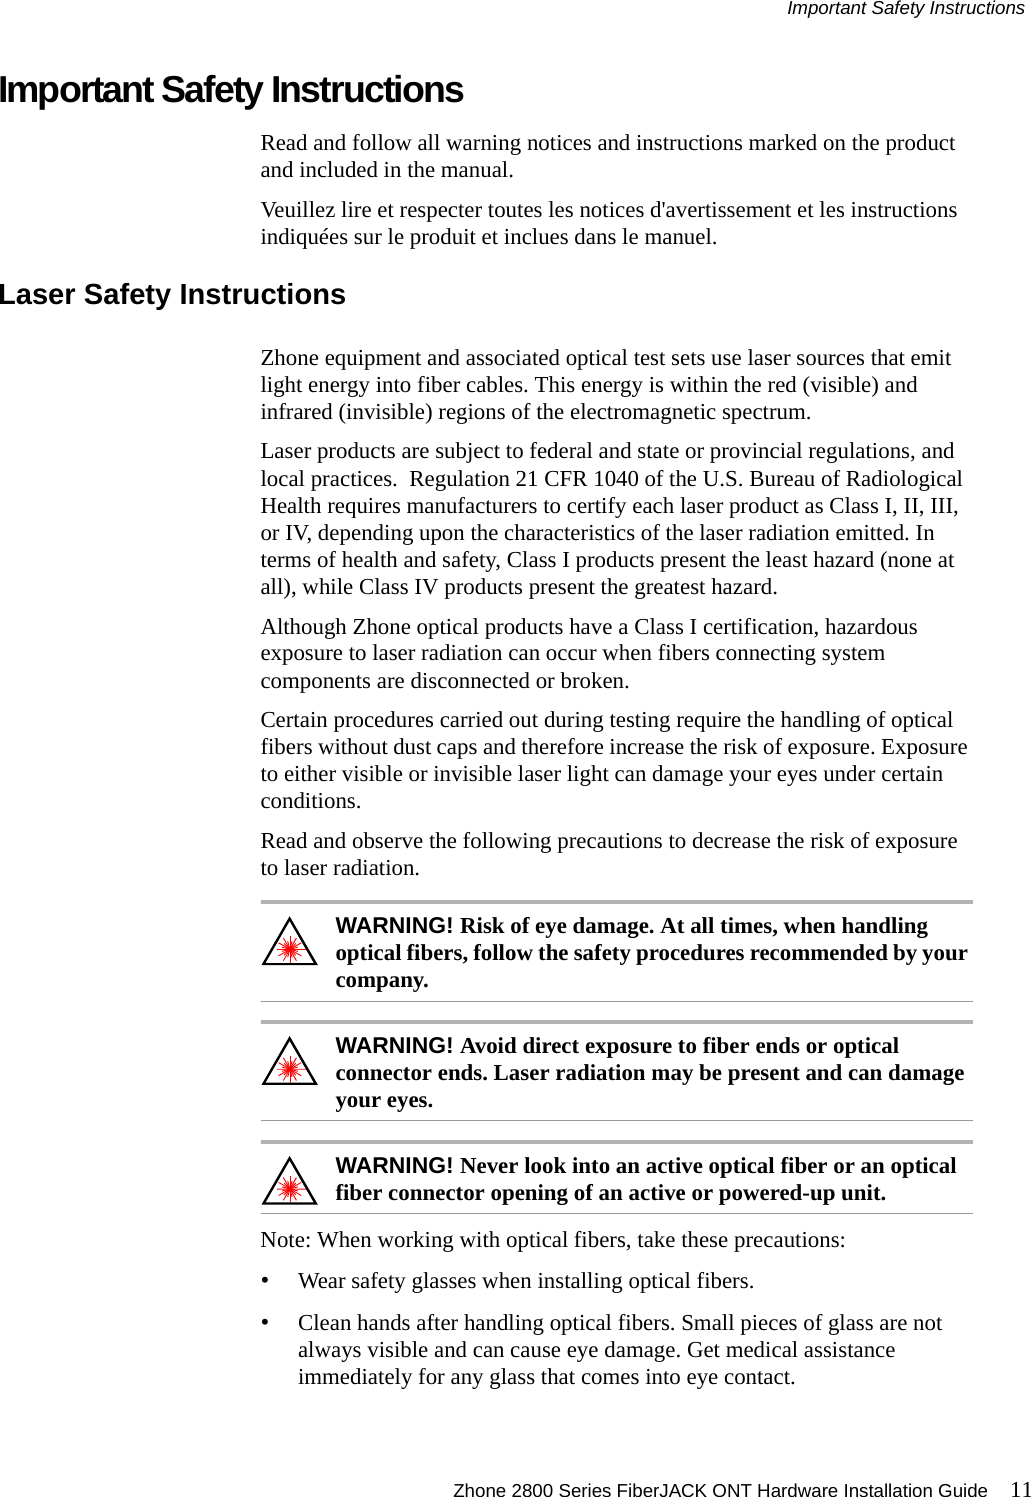 Important Safety Instructions Zhone 2800 Series FiberJACK ONT Hardware Installation Guide 11Important Safety InstructionsRead and follow all warning notices and instructions marked on the product and included in the manual.Veuillez lire et respecter toutes les notices d&apos;avertissement et les instructions indiquées sur le produit et inclues dans le manuel.Laser Safety InstructionsZhone equipment and associated optical test sets use laser sources that emit light energy into fiber cables. This energy is within the red (visible) and infrared (invisible) regions of the electromagnetic spectrum.Laser products are subject to federal and state or provincial regulations, and local practices.  Regulation 21 CFR 1040 of the U.S. Bureau of Radiological Health requires manufacturers to certify each laser product as Class I, II, III, or IV, depending upon the characteristics of the laser radiation emitted. In terms of health and safety, Class I products present the least hazard (none at all), while Class IV products present the greatest hazard.Although Zhone optical products have a Class I certification, hazardous exposure to laser radiation can occur when fibers connecting system components are disconnected or broken.Certain procedures carried out during testing require the handling of optical fibers without dust caps and therefore increase the risk of exposure. Exposure to either visible or invisible laser light can damage your eyes under certain conditions.Read and observe the following precautions to decrease the risk of exposure to laser radiation.WARNING! Risk of eye damage. At all times, when handling optical fibers, follow the safety procedures recommended by your company.WARNING! Avoid direct exposure to fiber ends or optical connector ends. Laser radiation may be present and can damage your eyes.WARNING! Never look into an active optical fiber or an optical fiber connector opening of an active or powered-up unit.Note: When working with optical fibers, take these precautions:•Wear safety glasses when installing optical fibers.•Clean hands after handling optical fibers. Small pieces of glass are not always visible and can cause eye damage. Get medical assistance immediately for any glass that comes into eye contact.